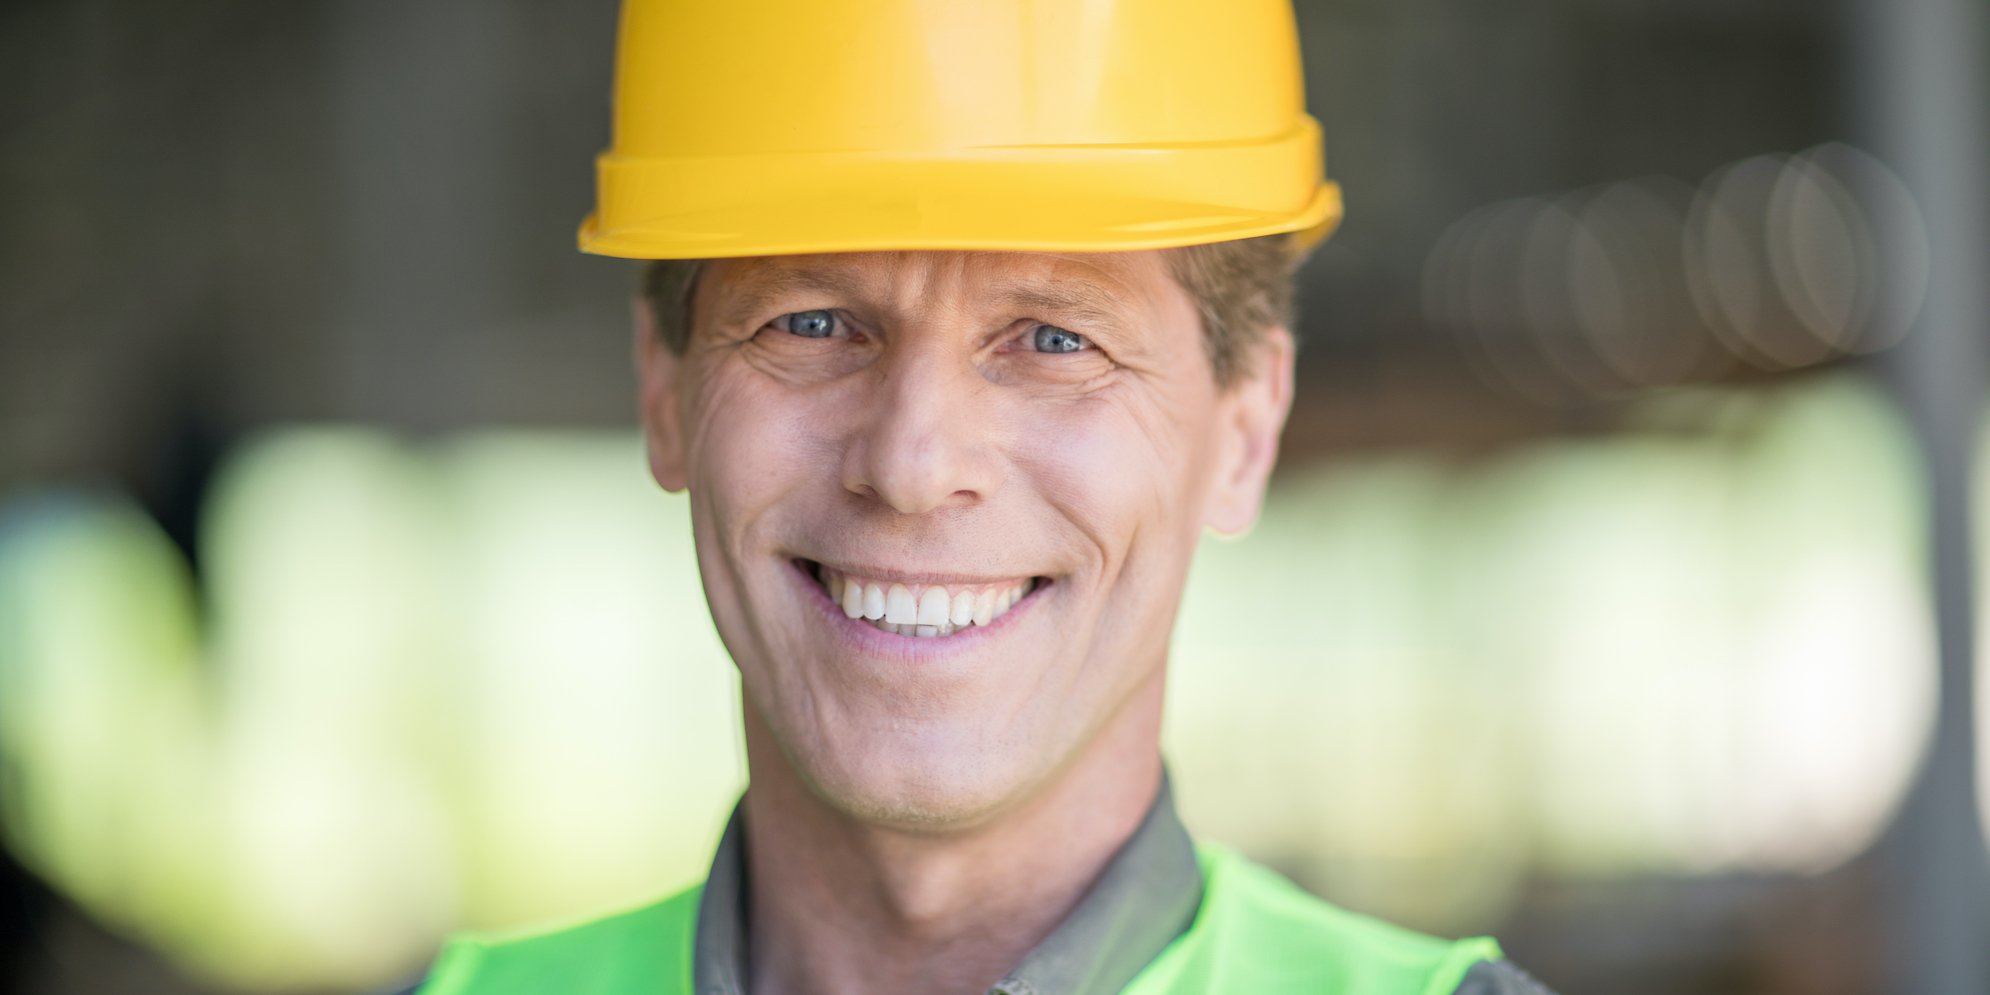 7 Characteristics of Great Safety Leaders